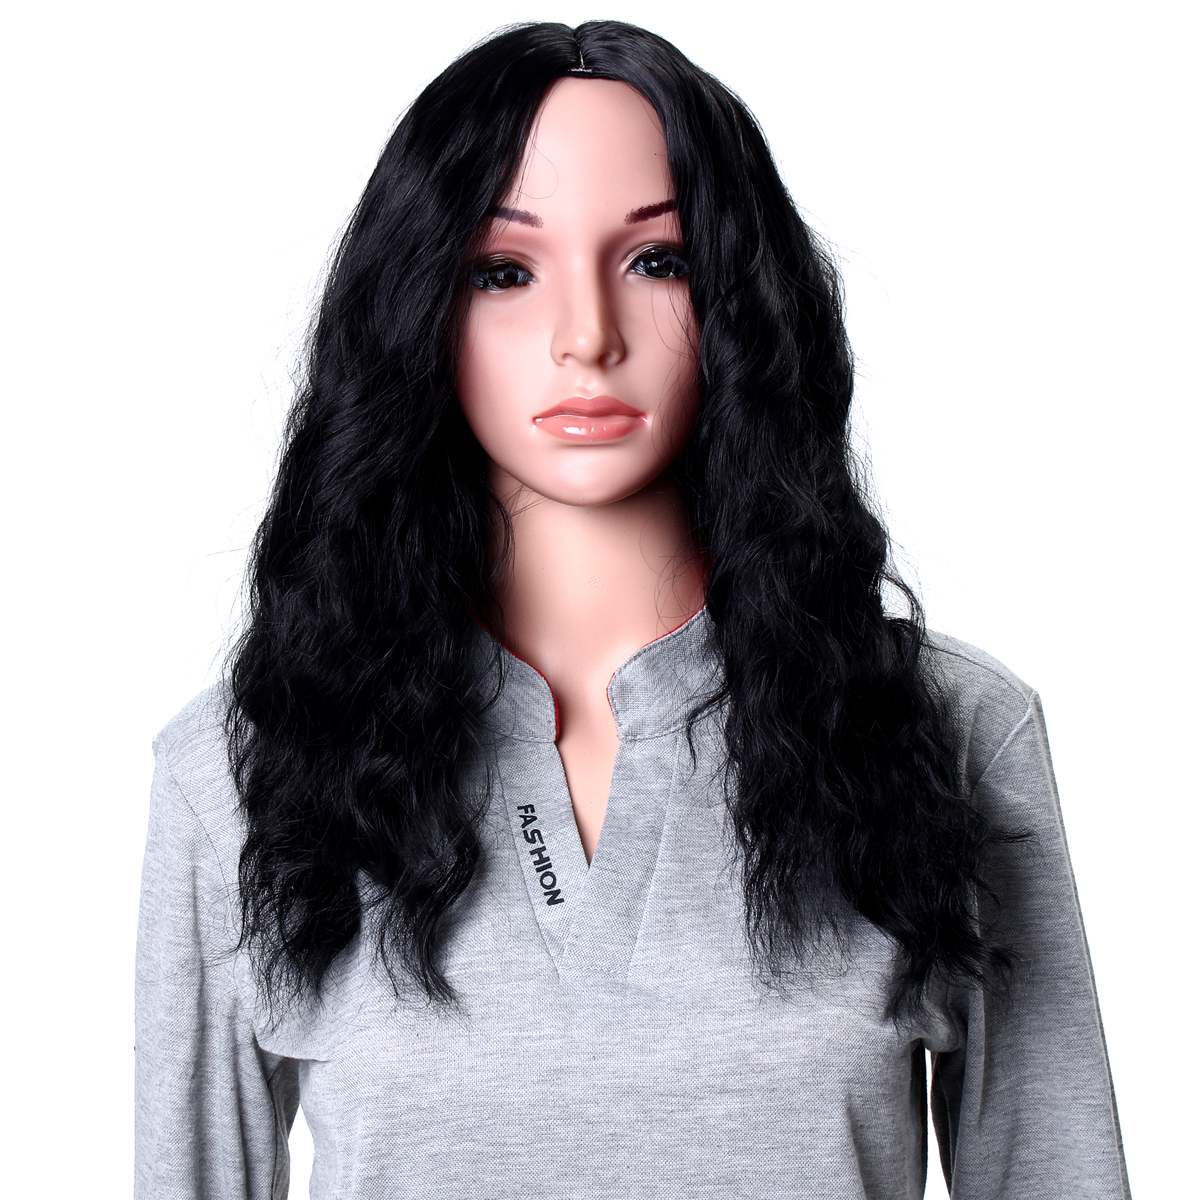 Black-Wig-Women-Long-Curly-Wavy-Synthetic-Hairstyle-Fashion-Heat-Resistant-1288680